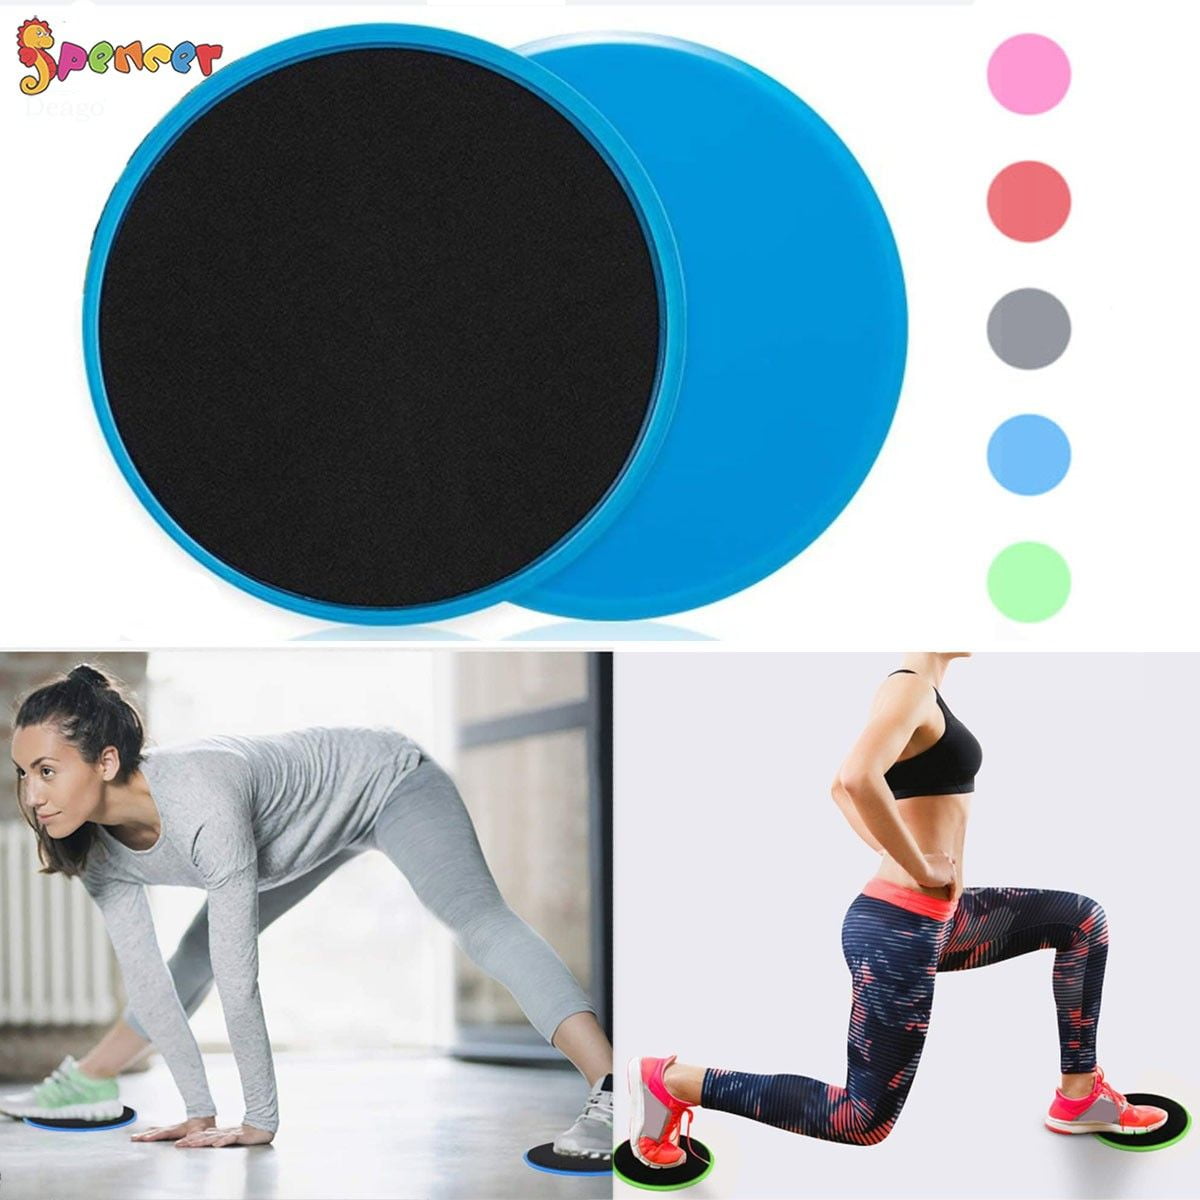 Gym Workout Set Extra Long Ice Cooling Towel Gliding Discs Exercise Sliders 